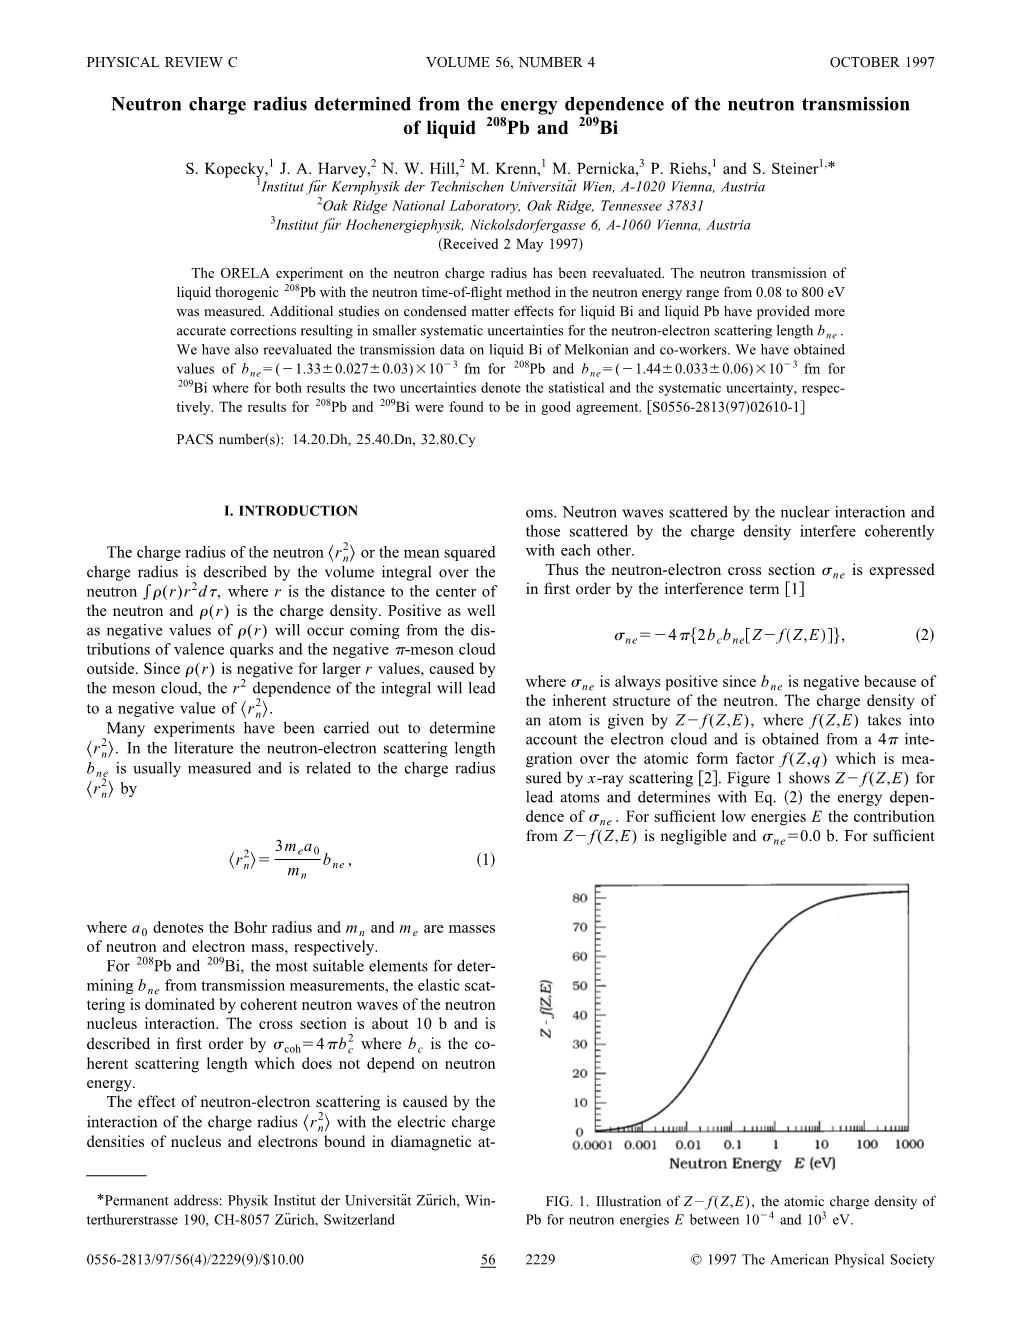 Neutron Charge Radius Determined from the Energy Dependence of the Neutron Transmission of Liquid 208Pb and 209Bi